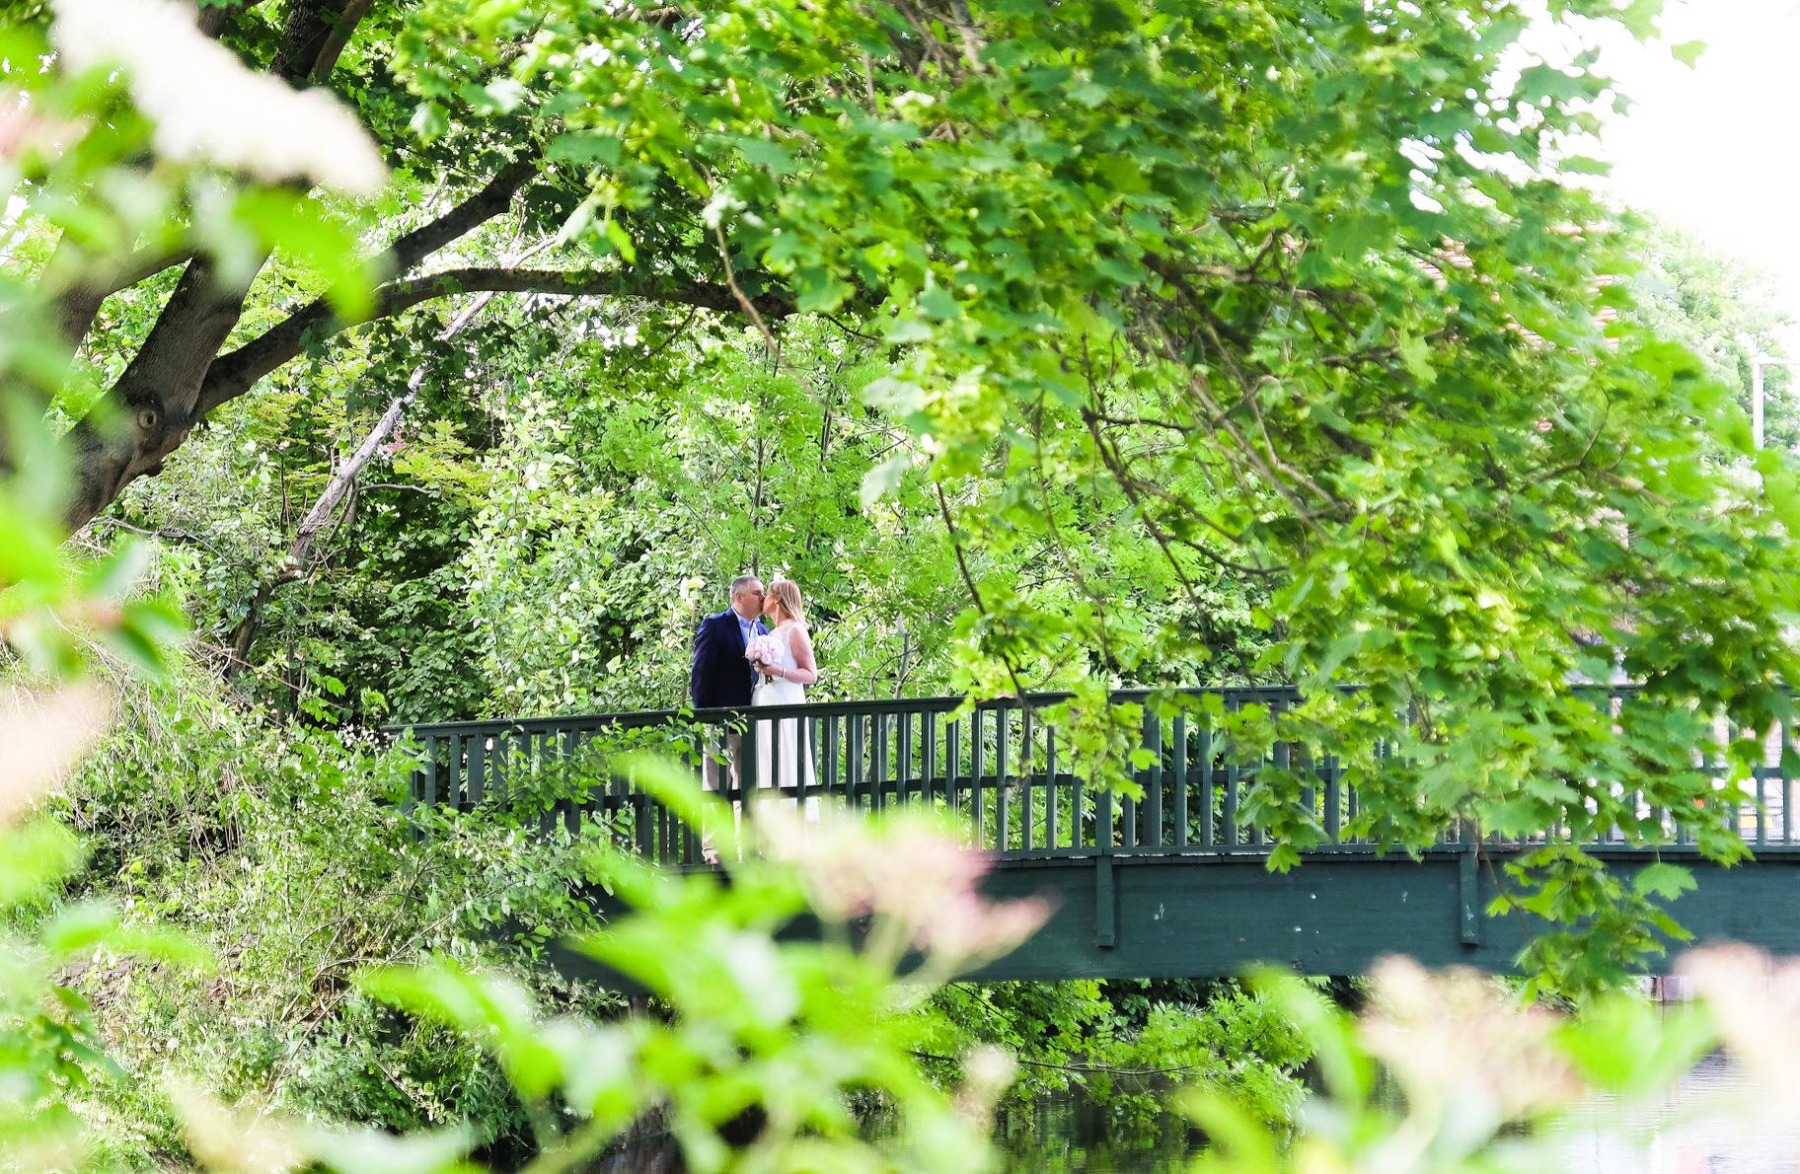 A couple kissing on the green bridge above the river lea, surrounded by green trees